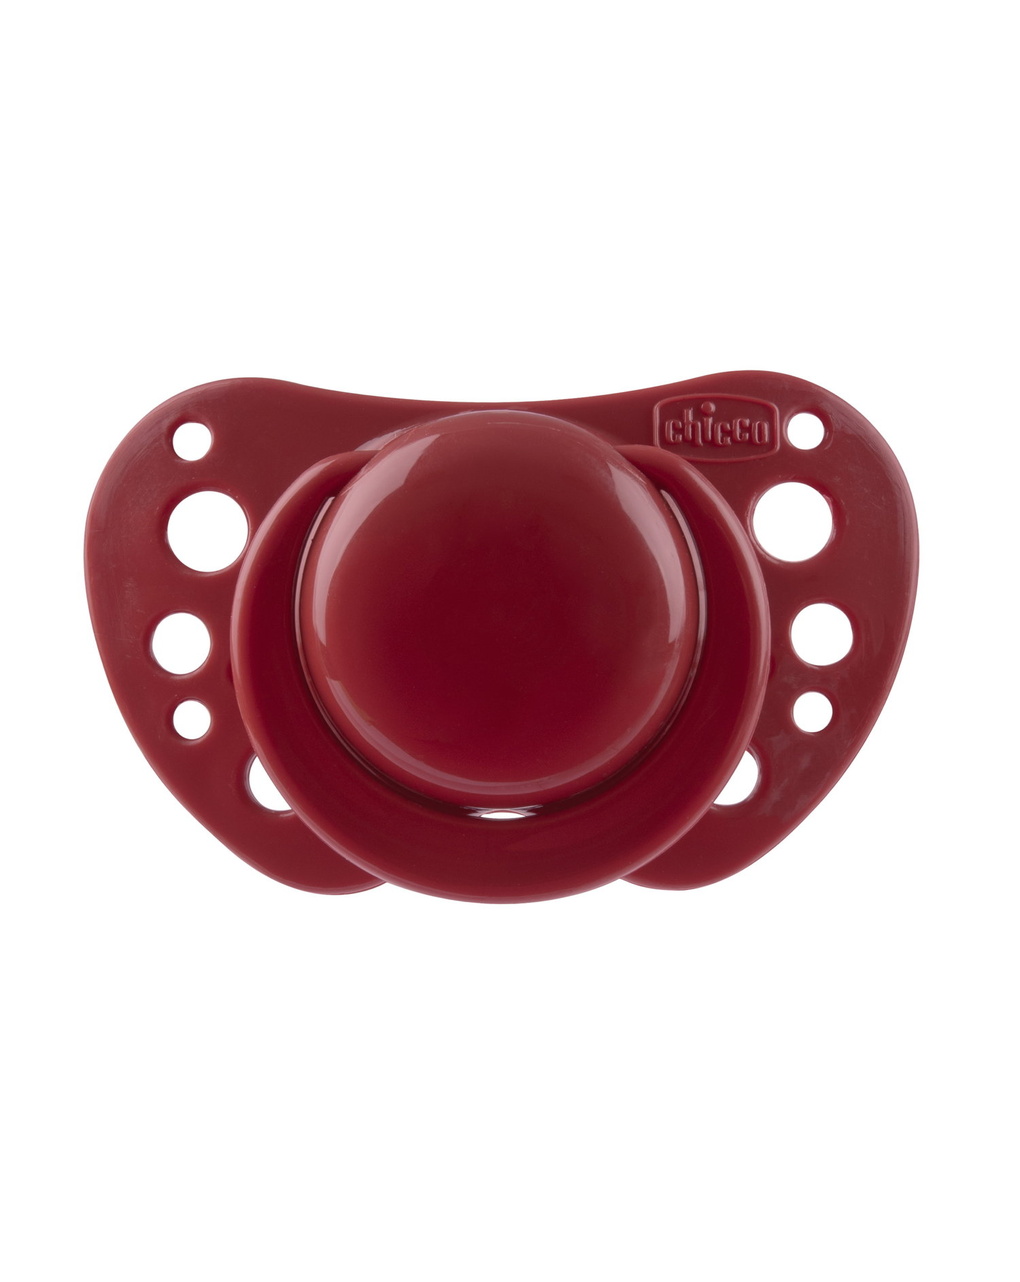 Physioforma air rosso in silicone 6-16 mesi | 2 pezzi | chicco